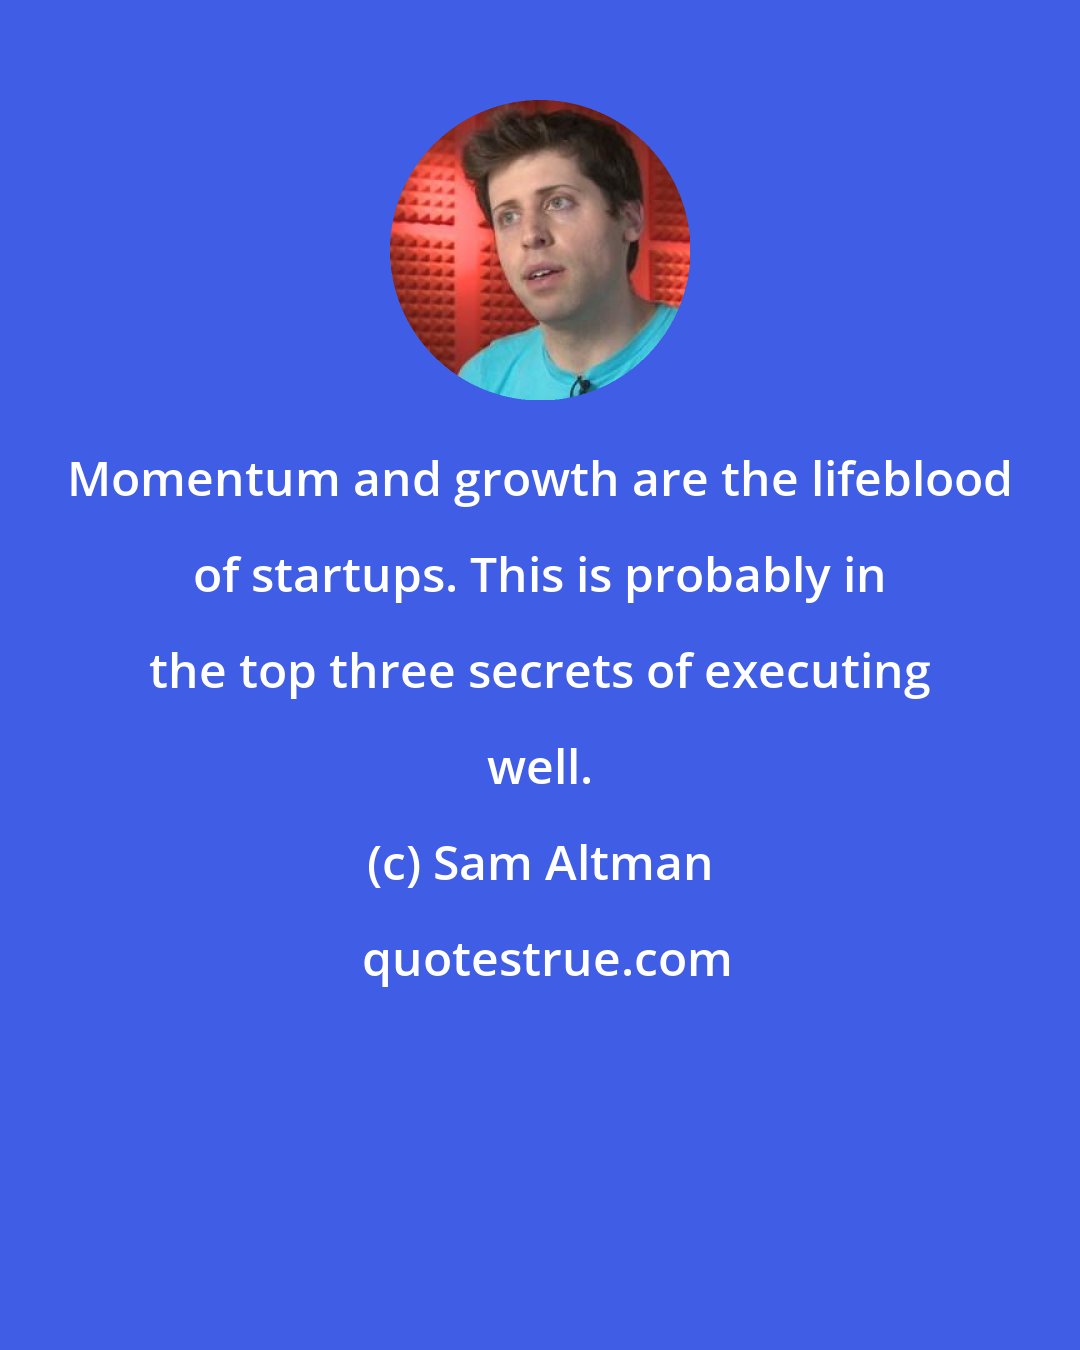 Sam Altman: Momentum and growth are the lifeblood of startups. This is probably in the top three secrets of executing well.